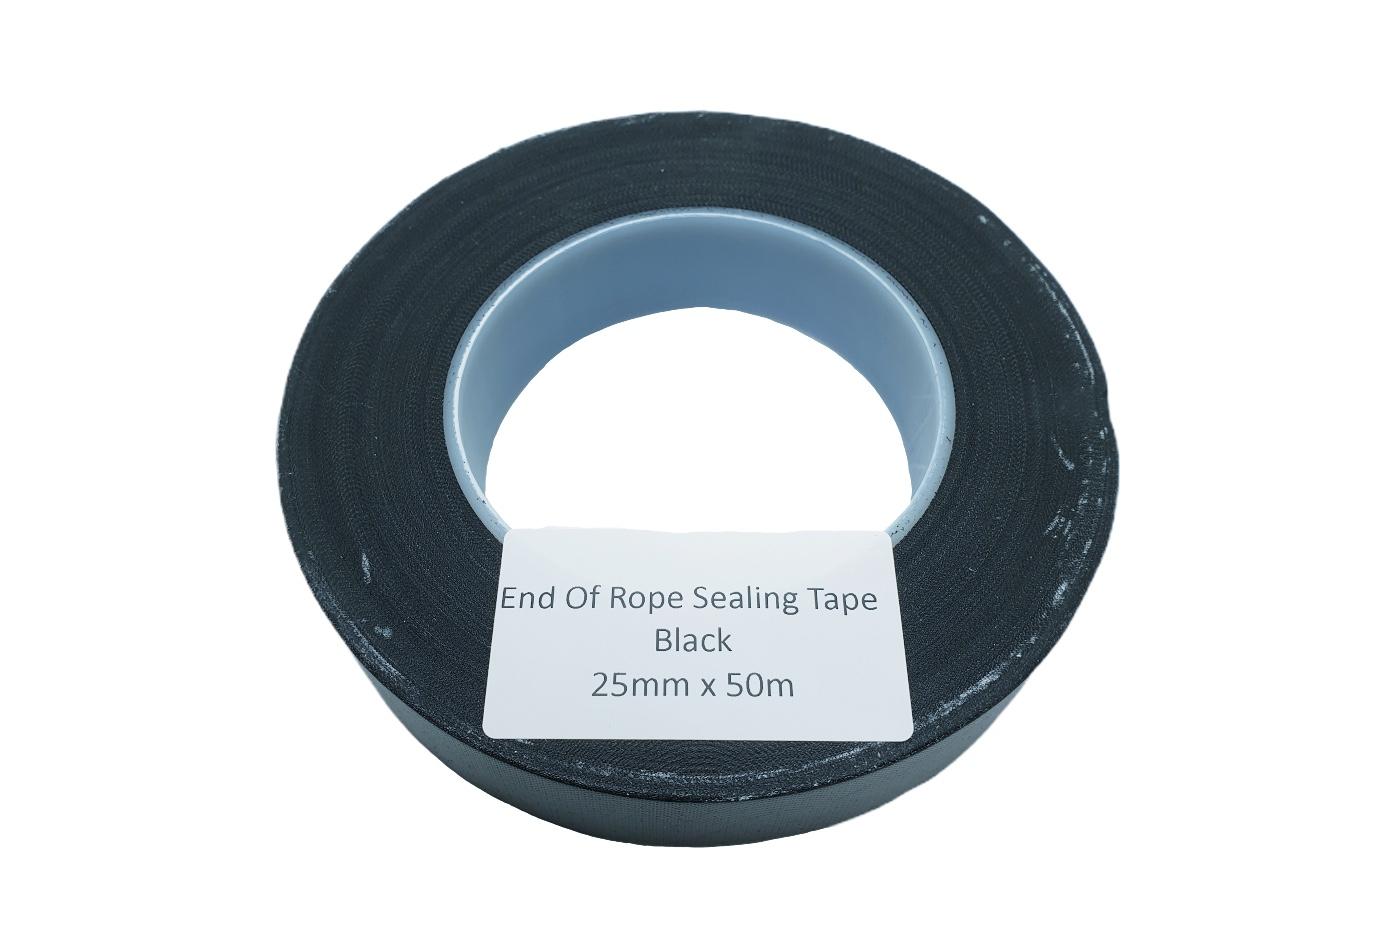 A 50 metre roll of Black 25mm end of rope sealing tape.